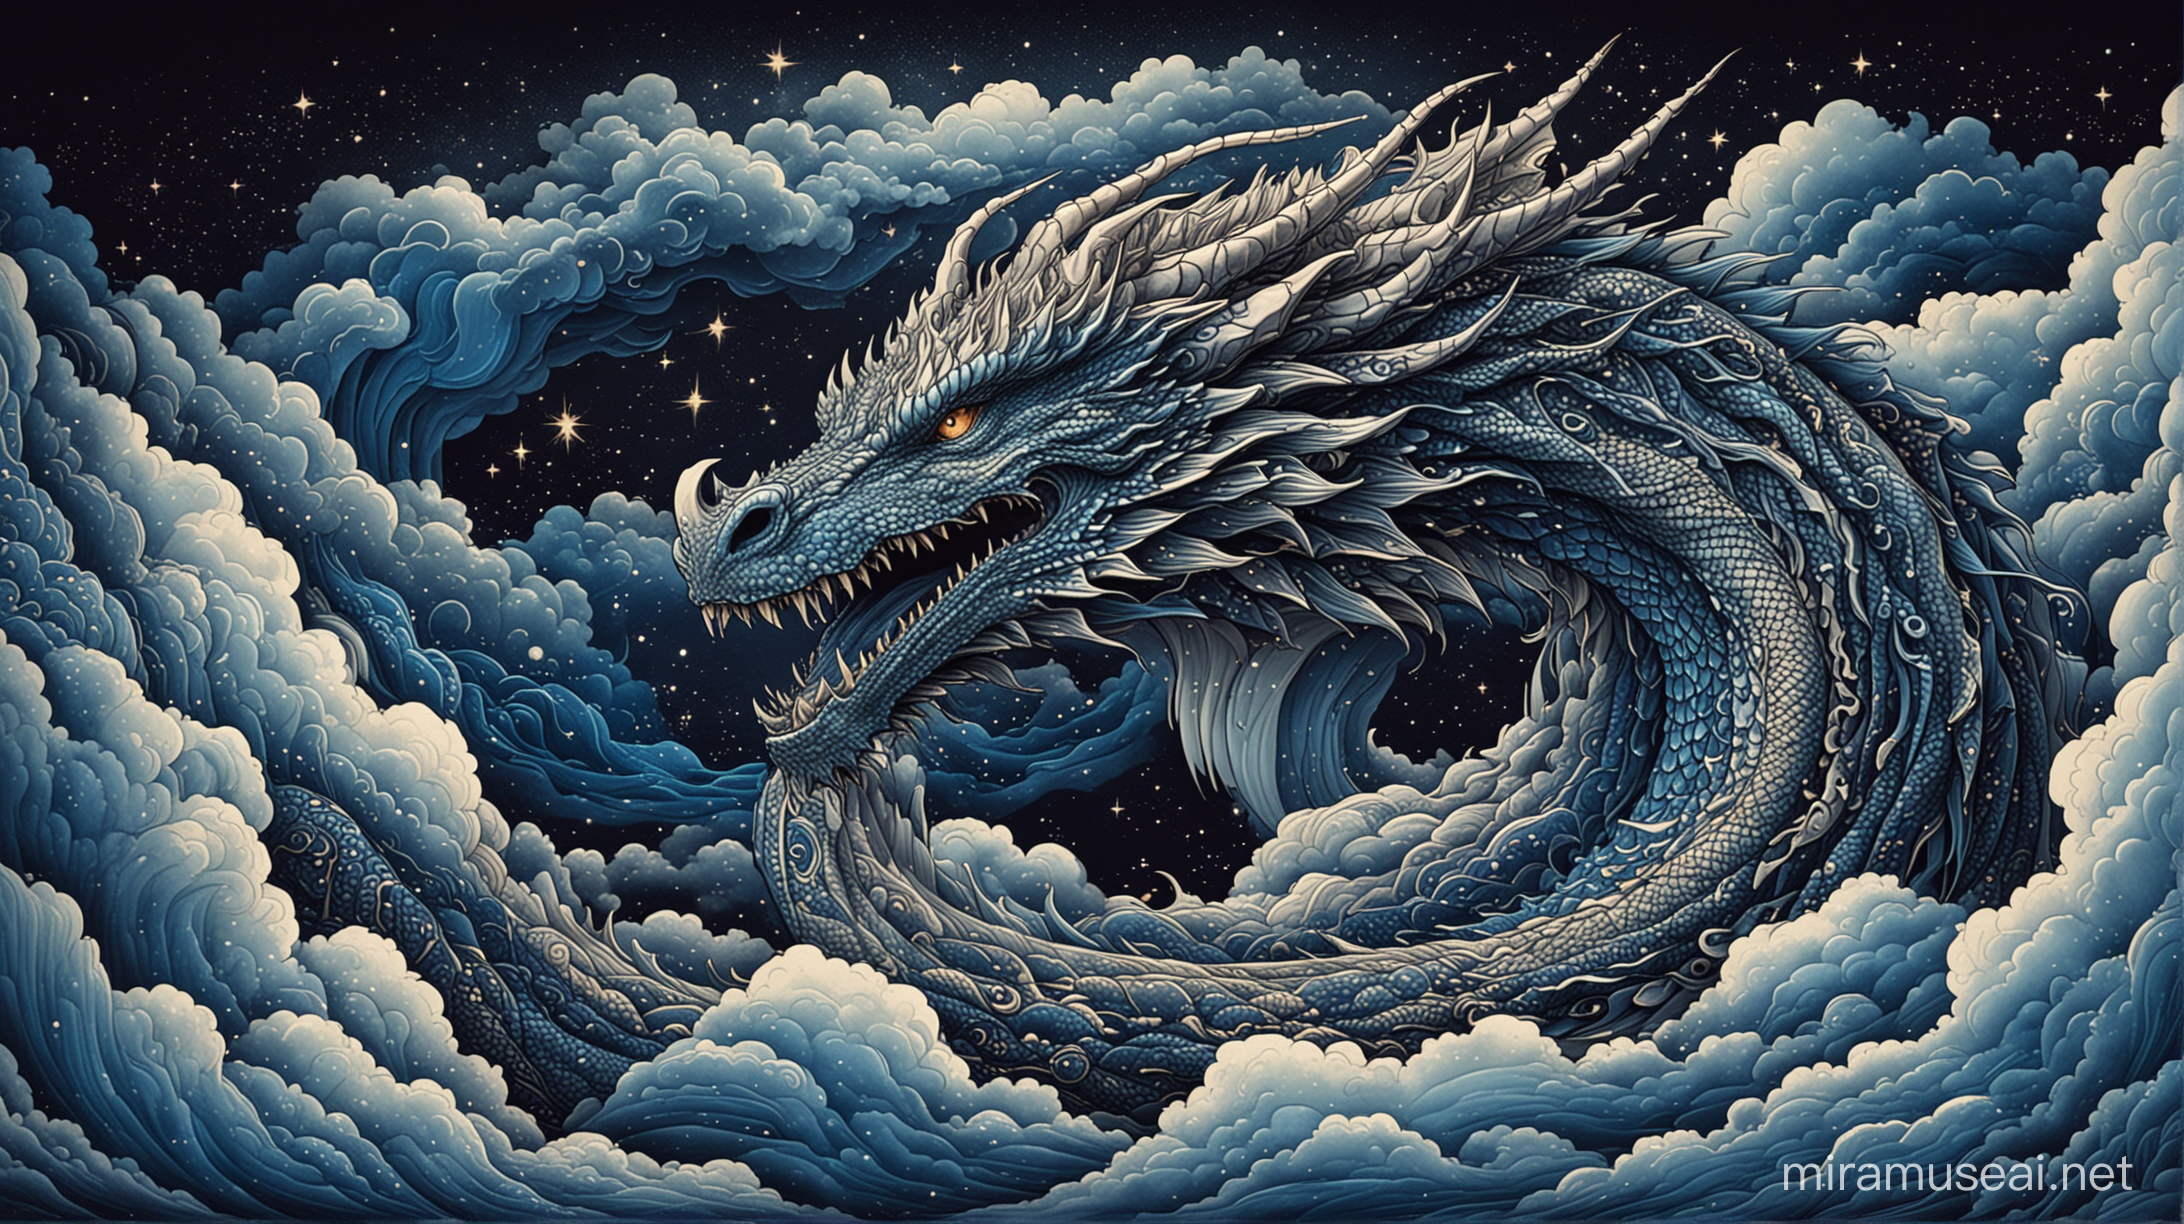 A powerful dragon spirit composed of undulating line art, its sinuous body intertwined with stylized clouds and cosmic motifs against a deep blue background